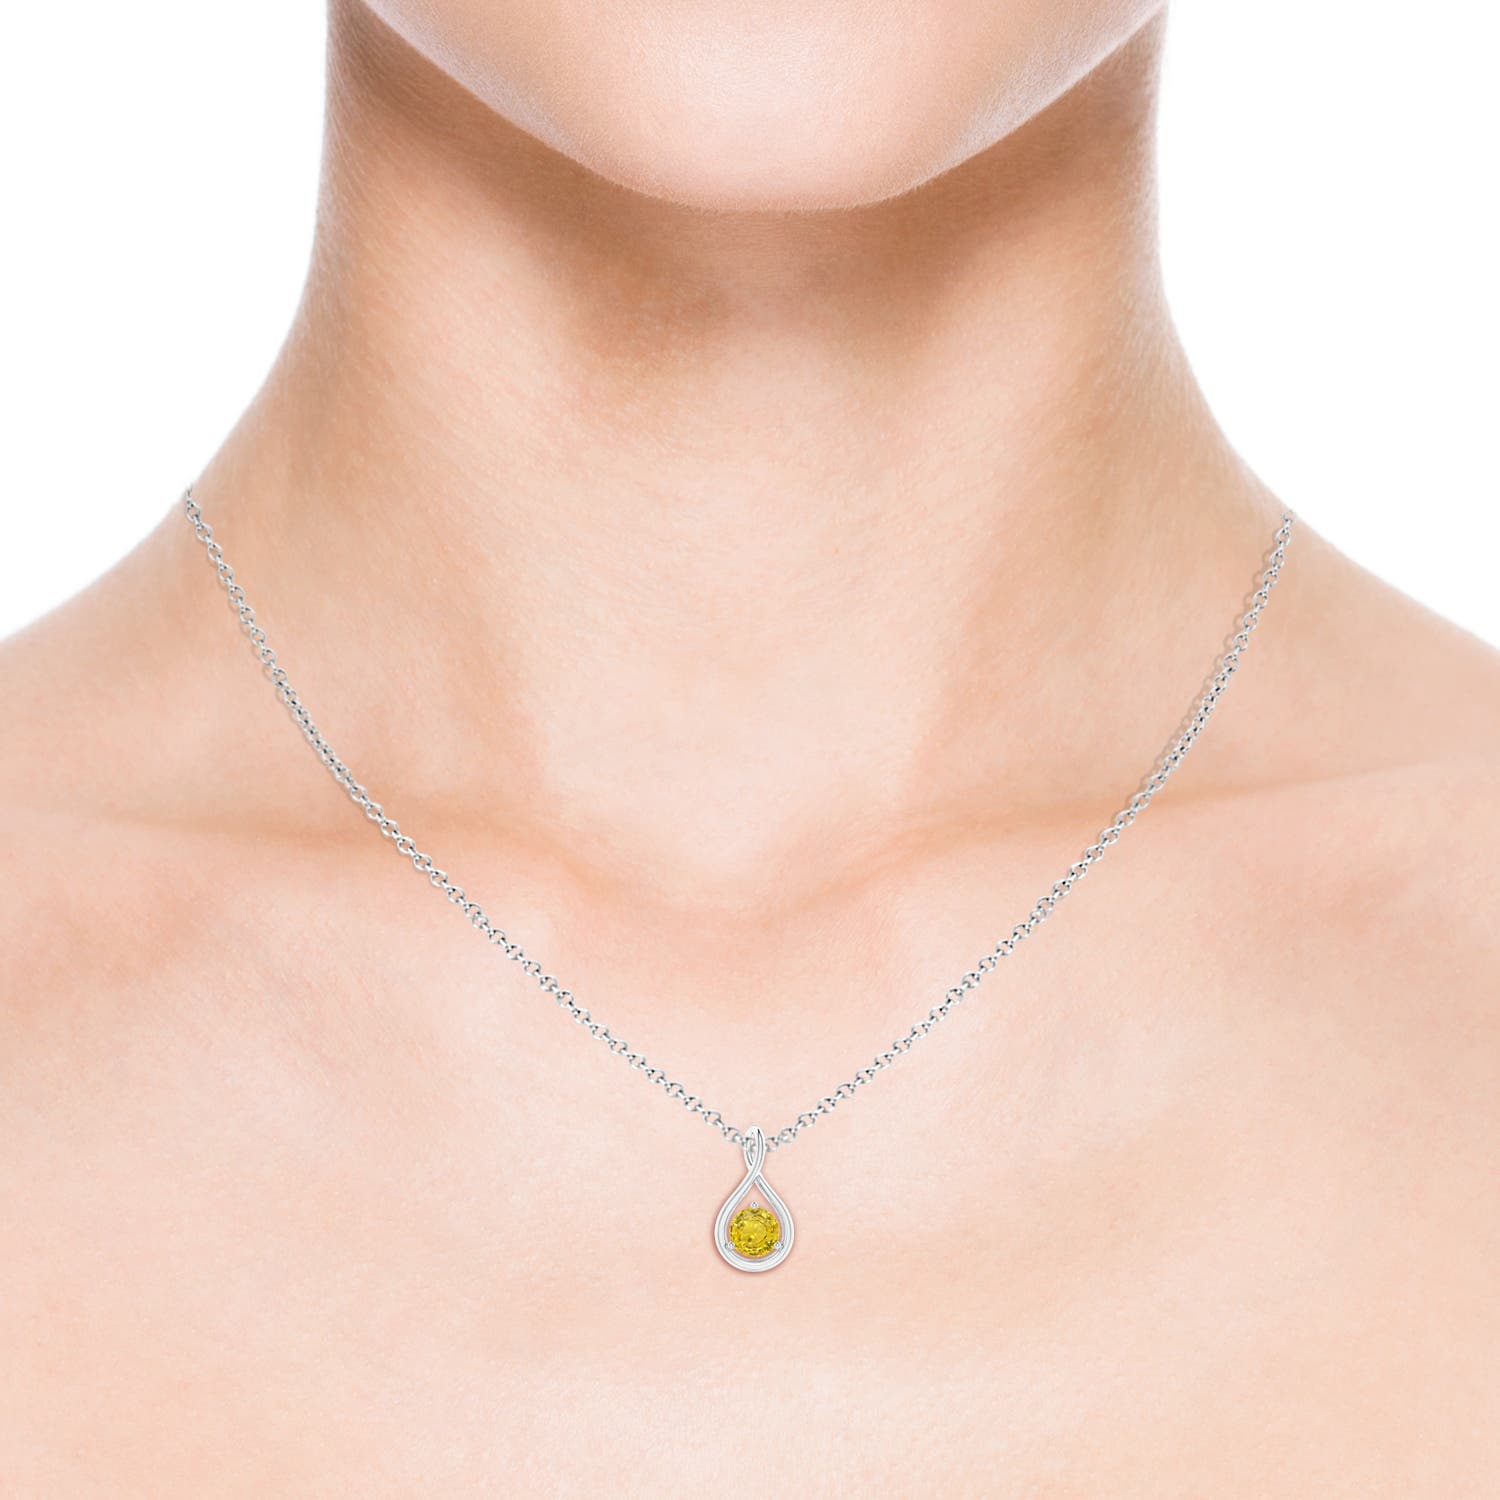 Shop Yellow Sapphire Pendant Necklaces for Women | Angara